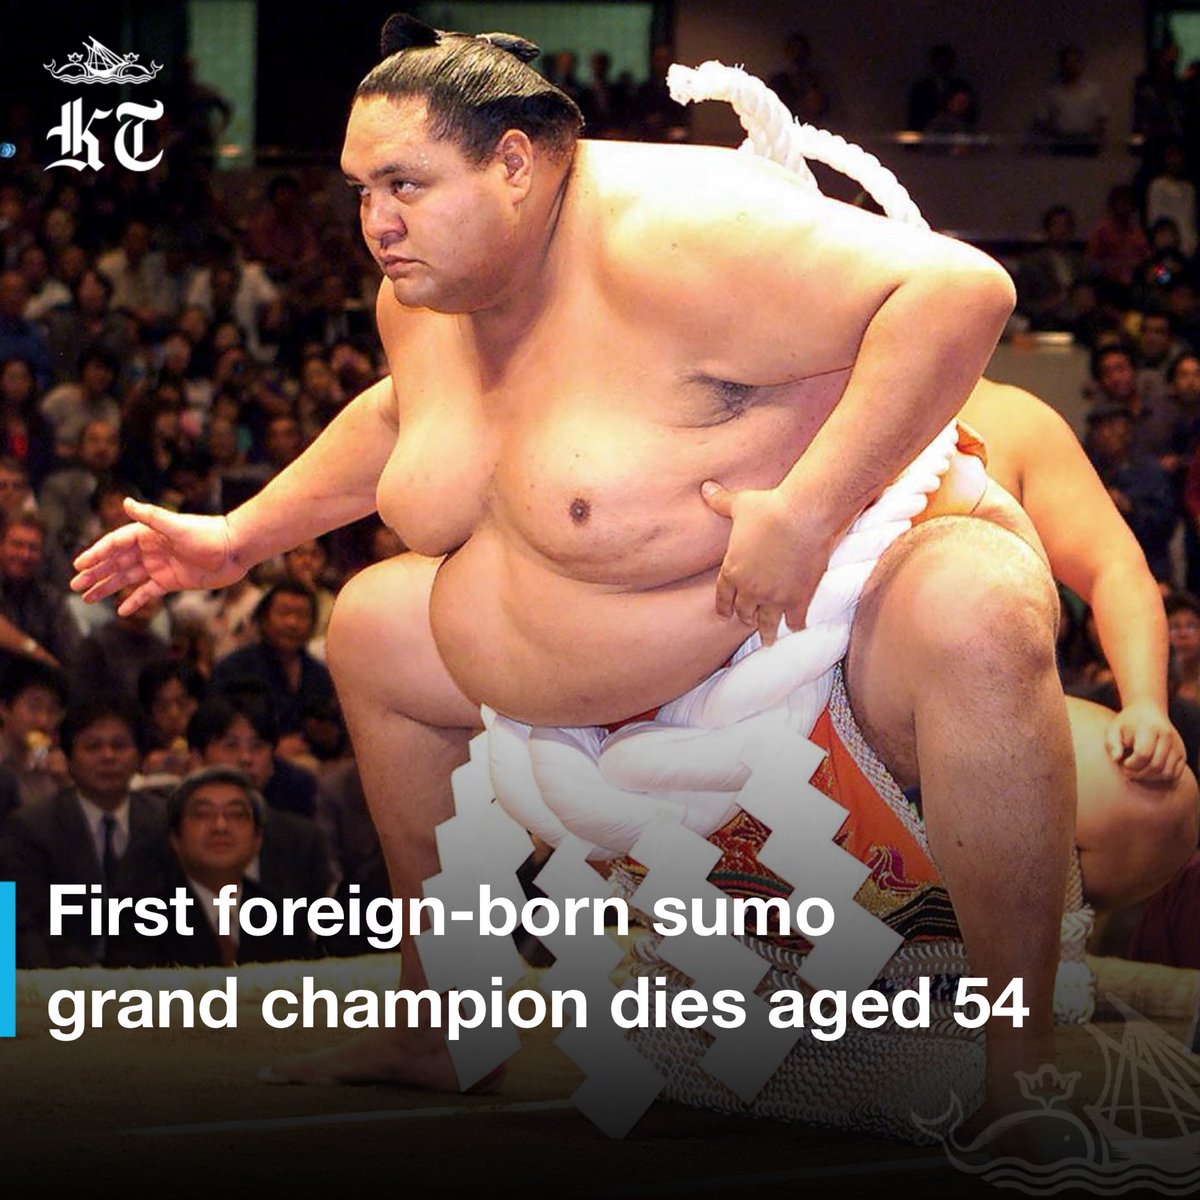 Akebono, a Hawaiian who was the first foreign-born sumo wrestler to become a grand champion, has died aged 54, US officials and Japanese media said Thursday. Born Chad Rowan in 1969, Akebono was among the most successful sumo wrestlers of the 1990s. He reached the sport's highest…